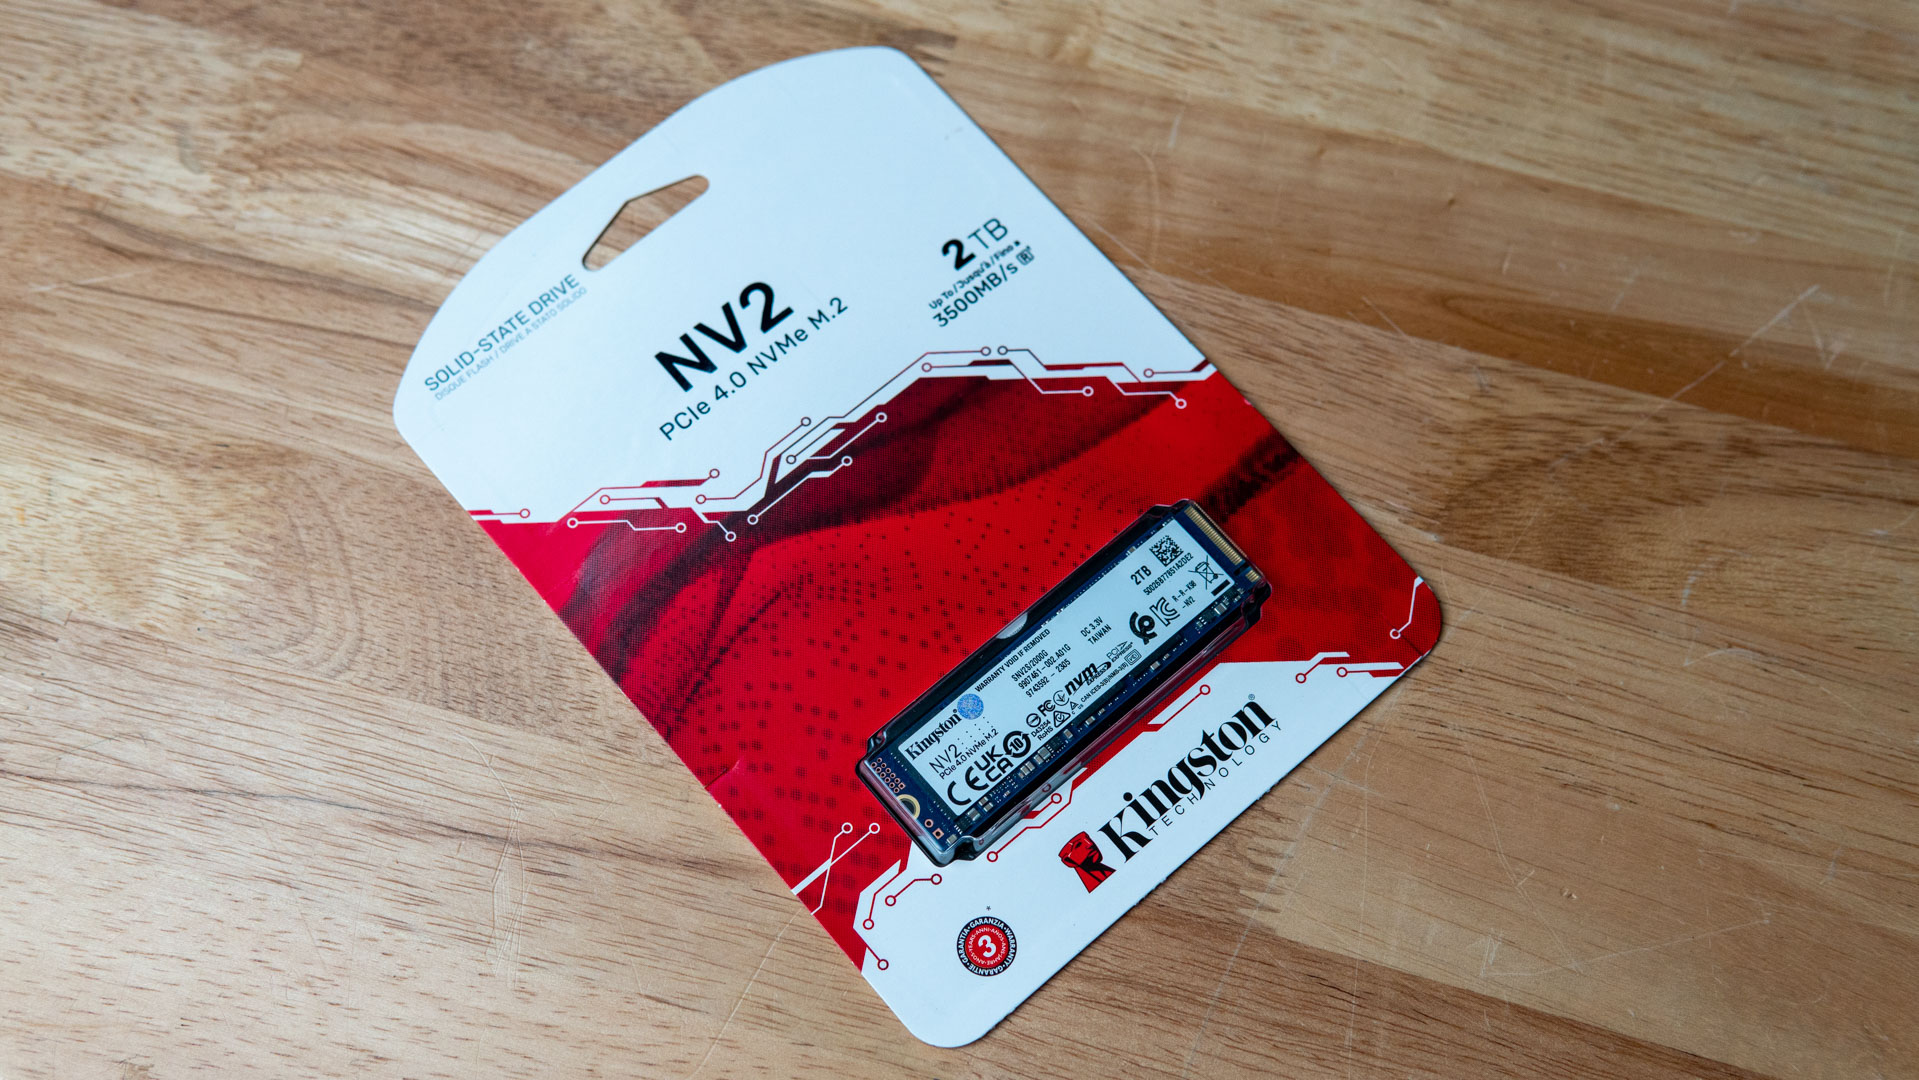 Review - Kingston NV2 PCIe 4.0 M.2 NVMe SSD - Great for all but one use  case at an affordable price